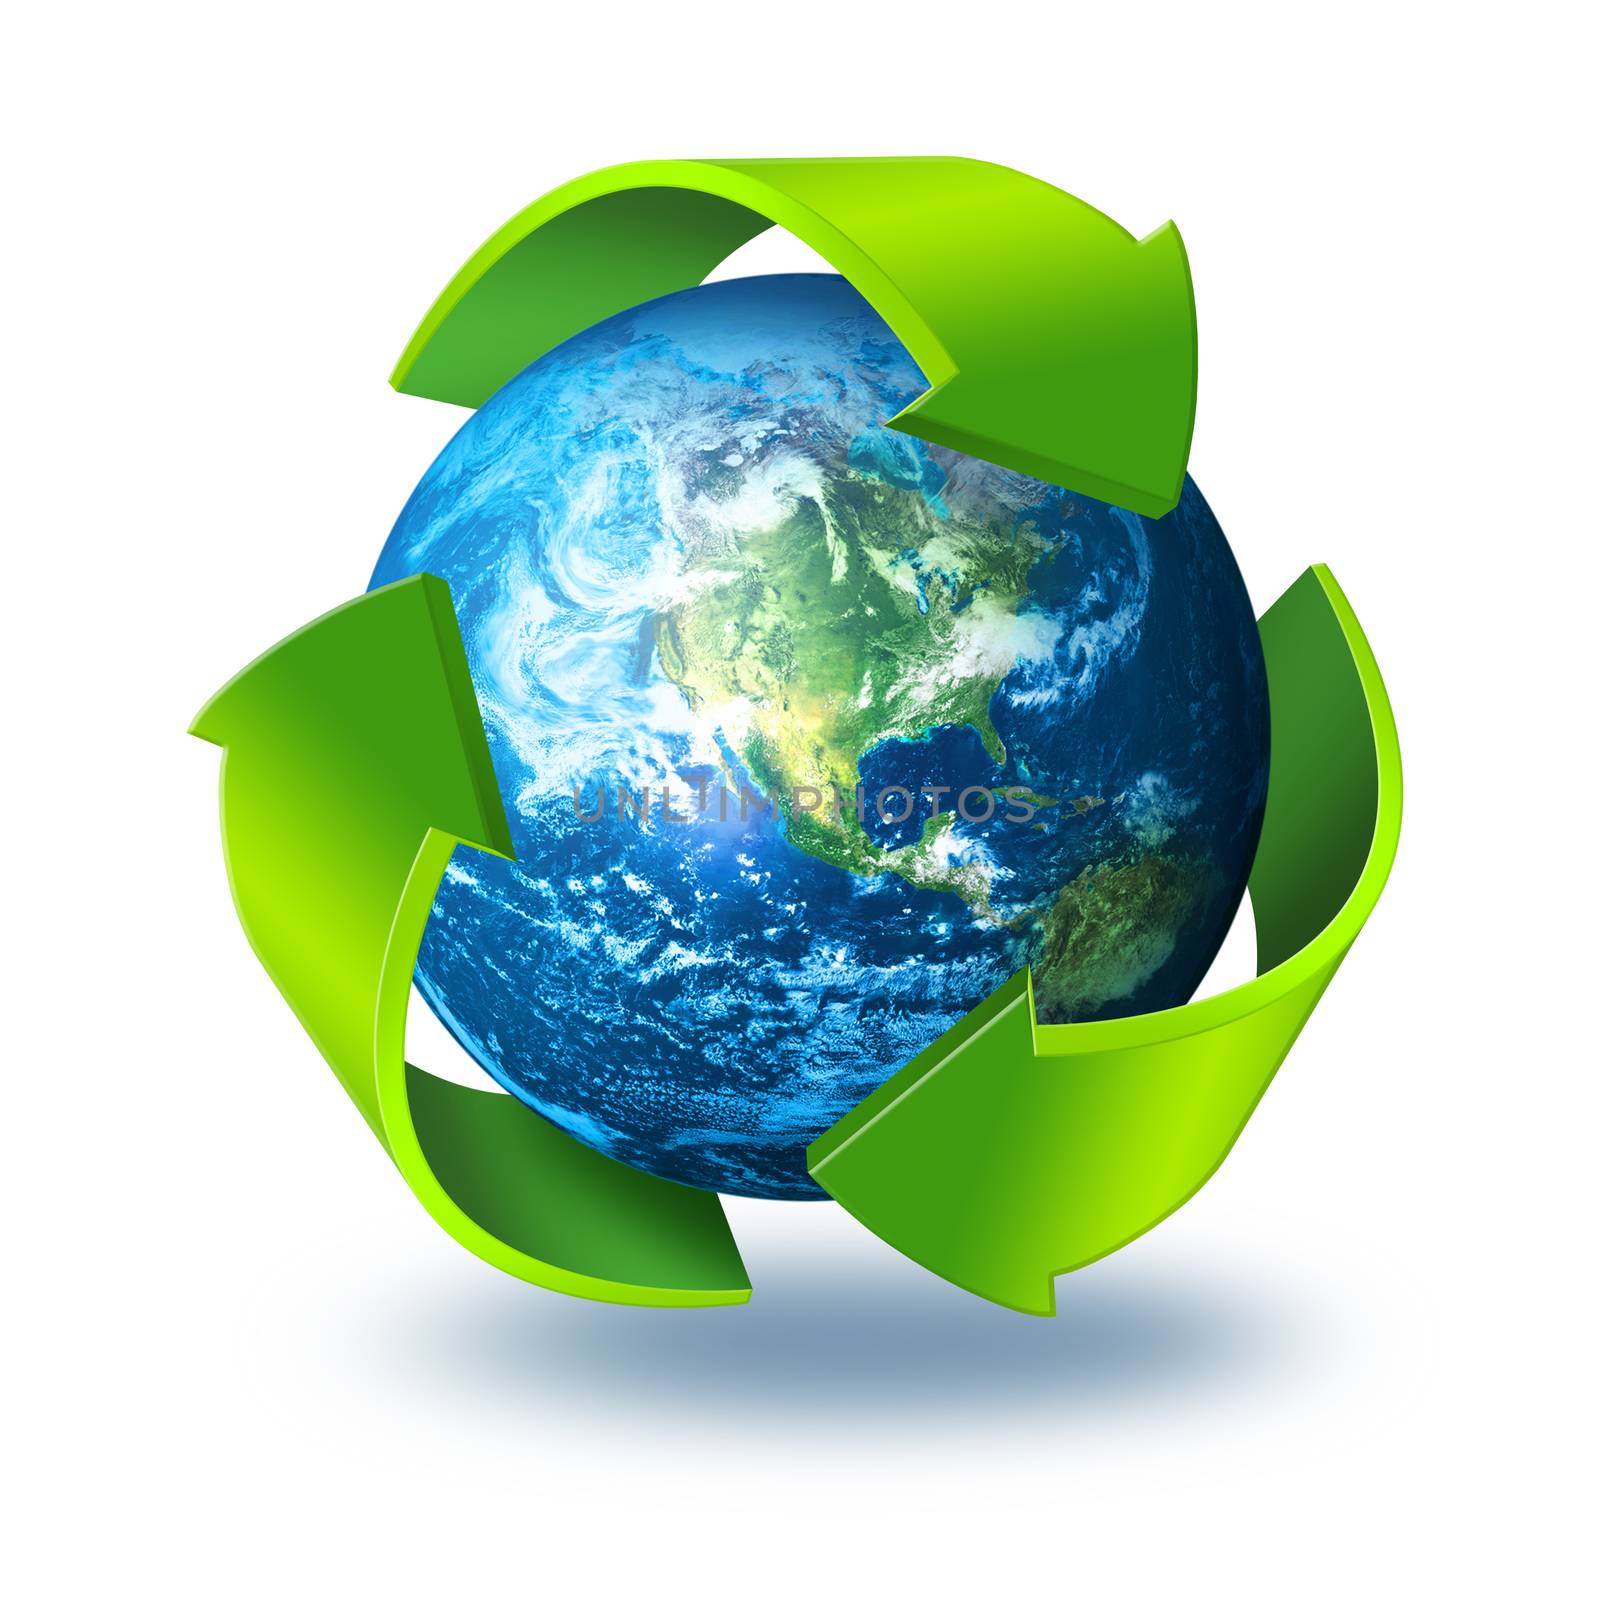 Green arrows symbol around blue planet Earth, recycling concept 3d, isolated on white background